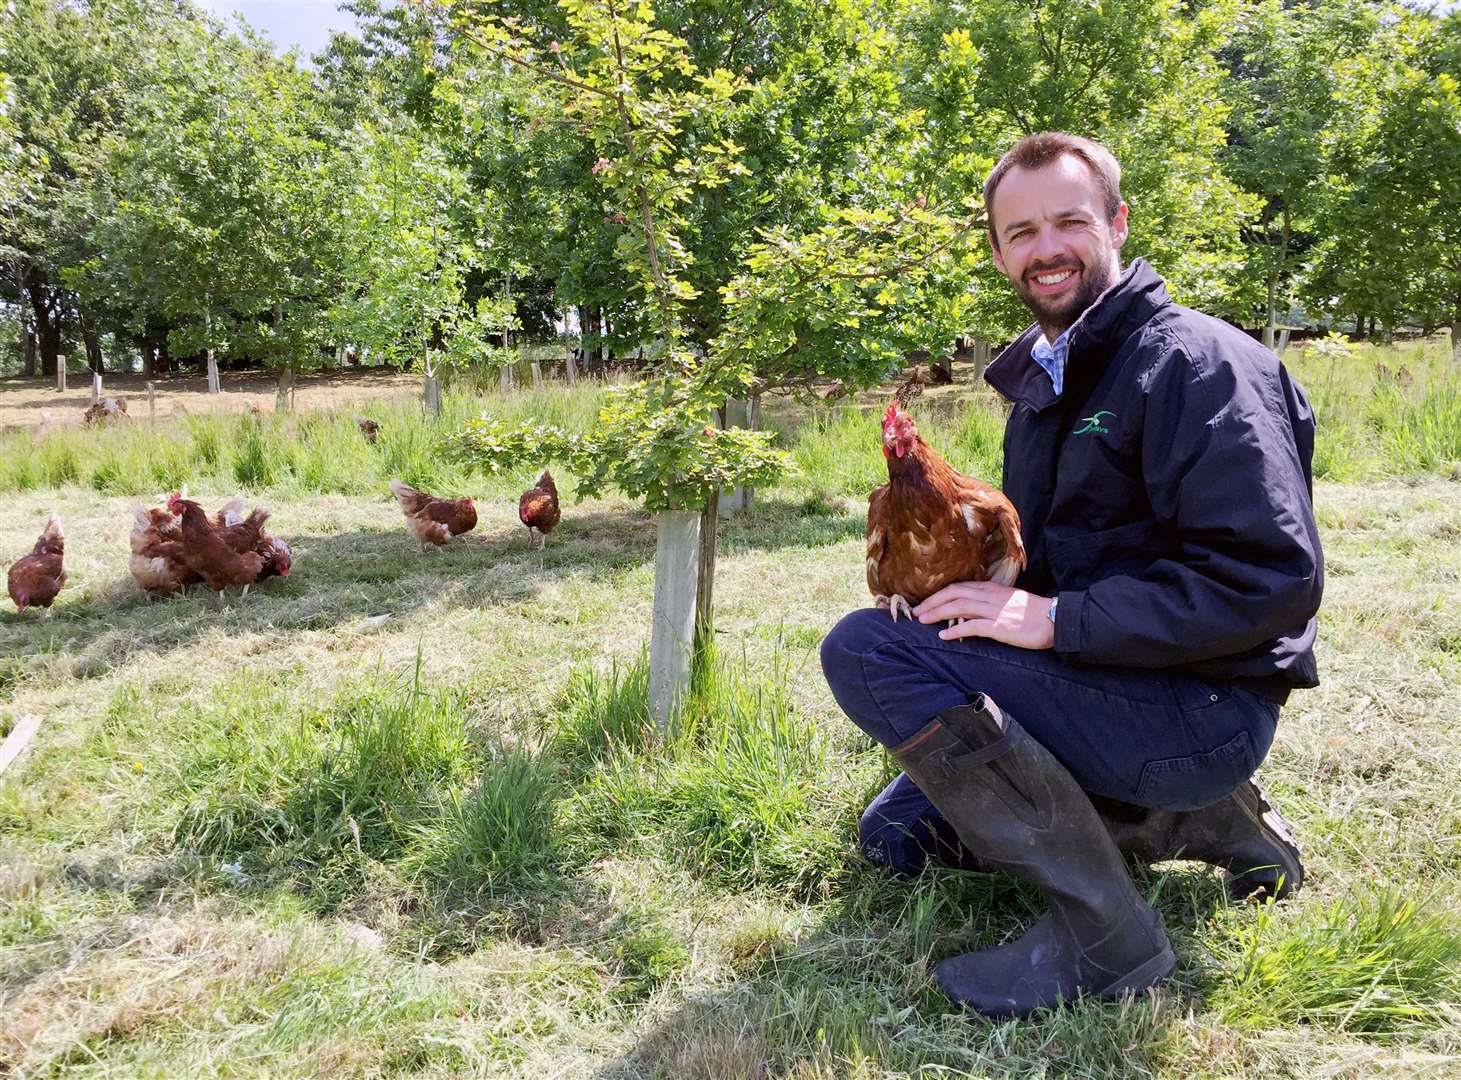 Graham Fuller is production manager at chicken farming firm Fridays. Picture: Fridays Ltd